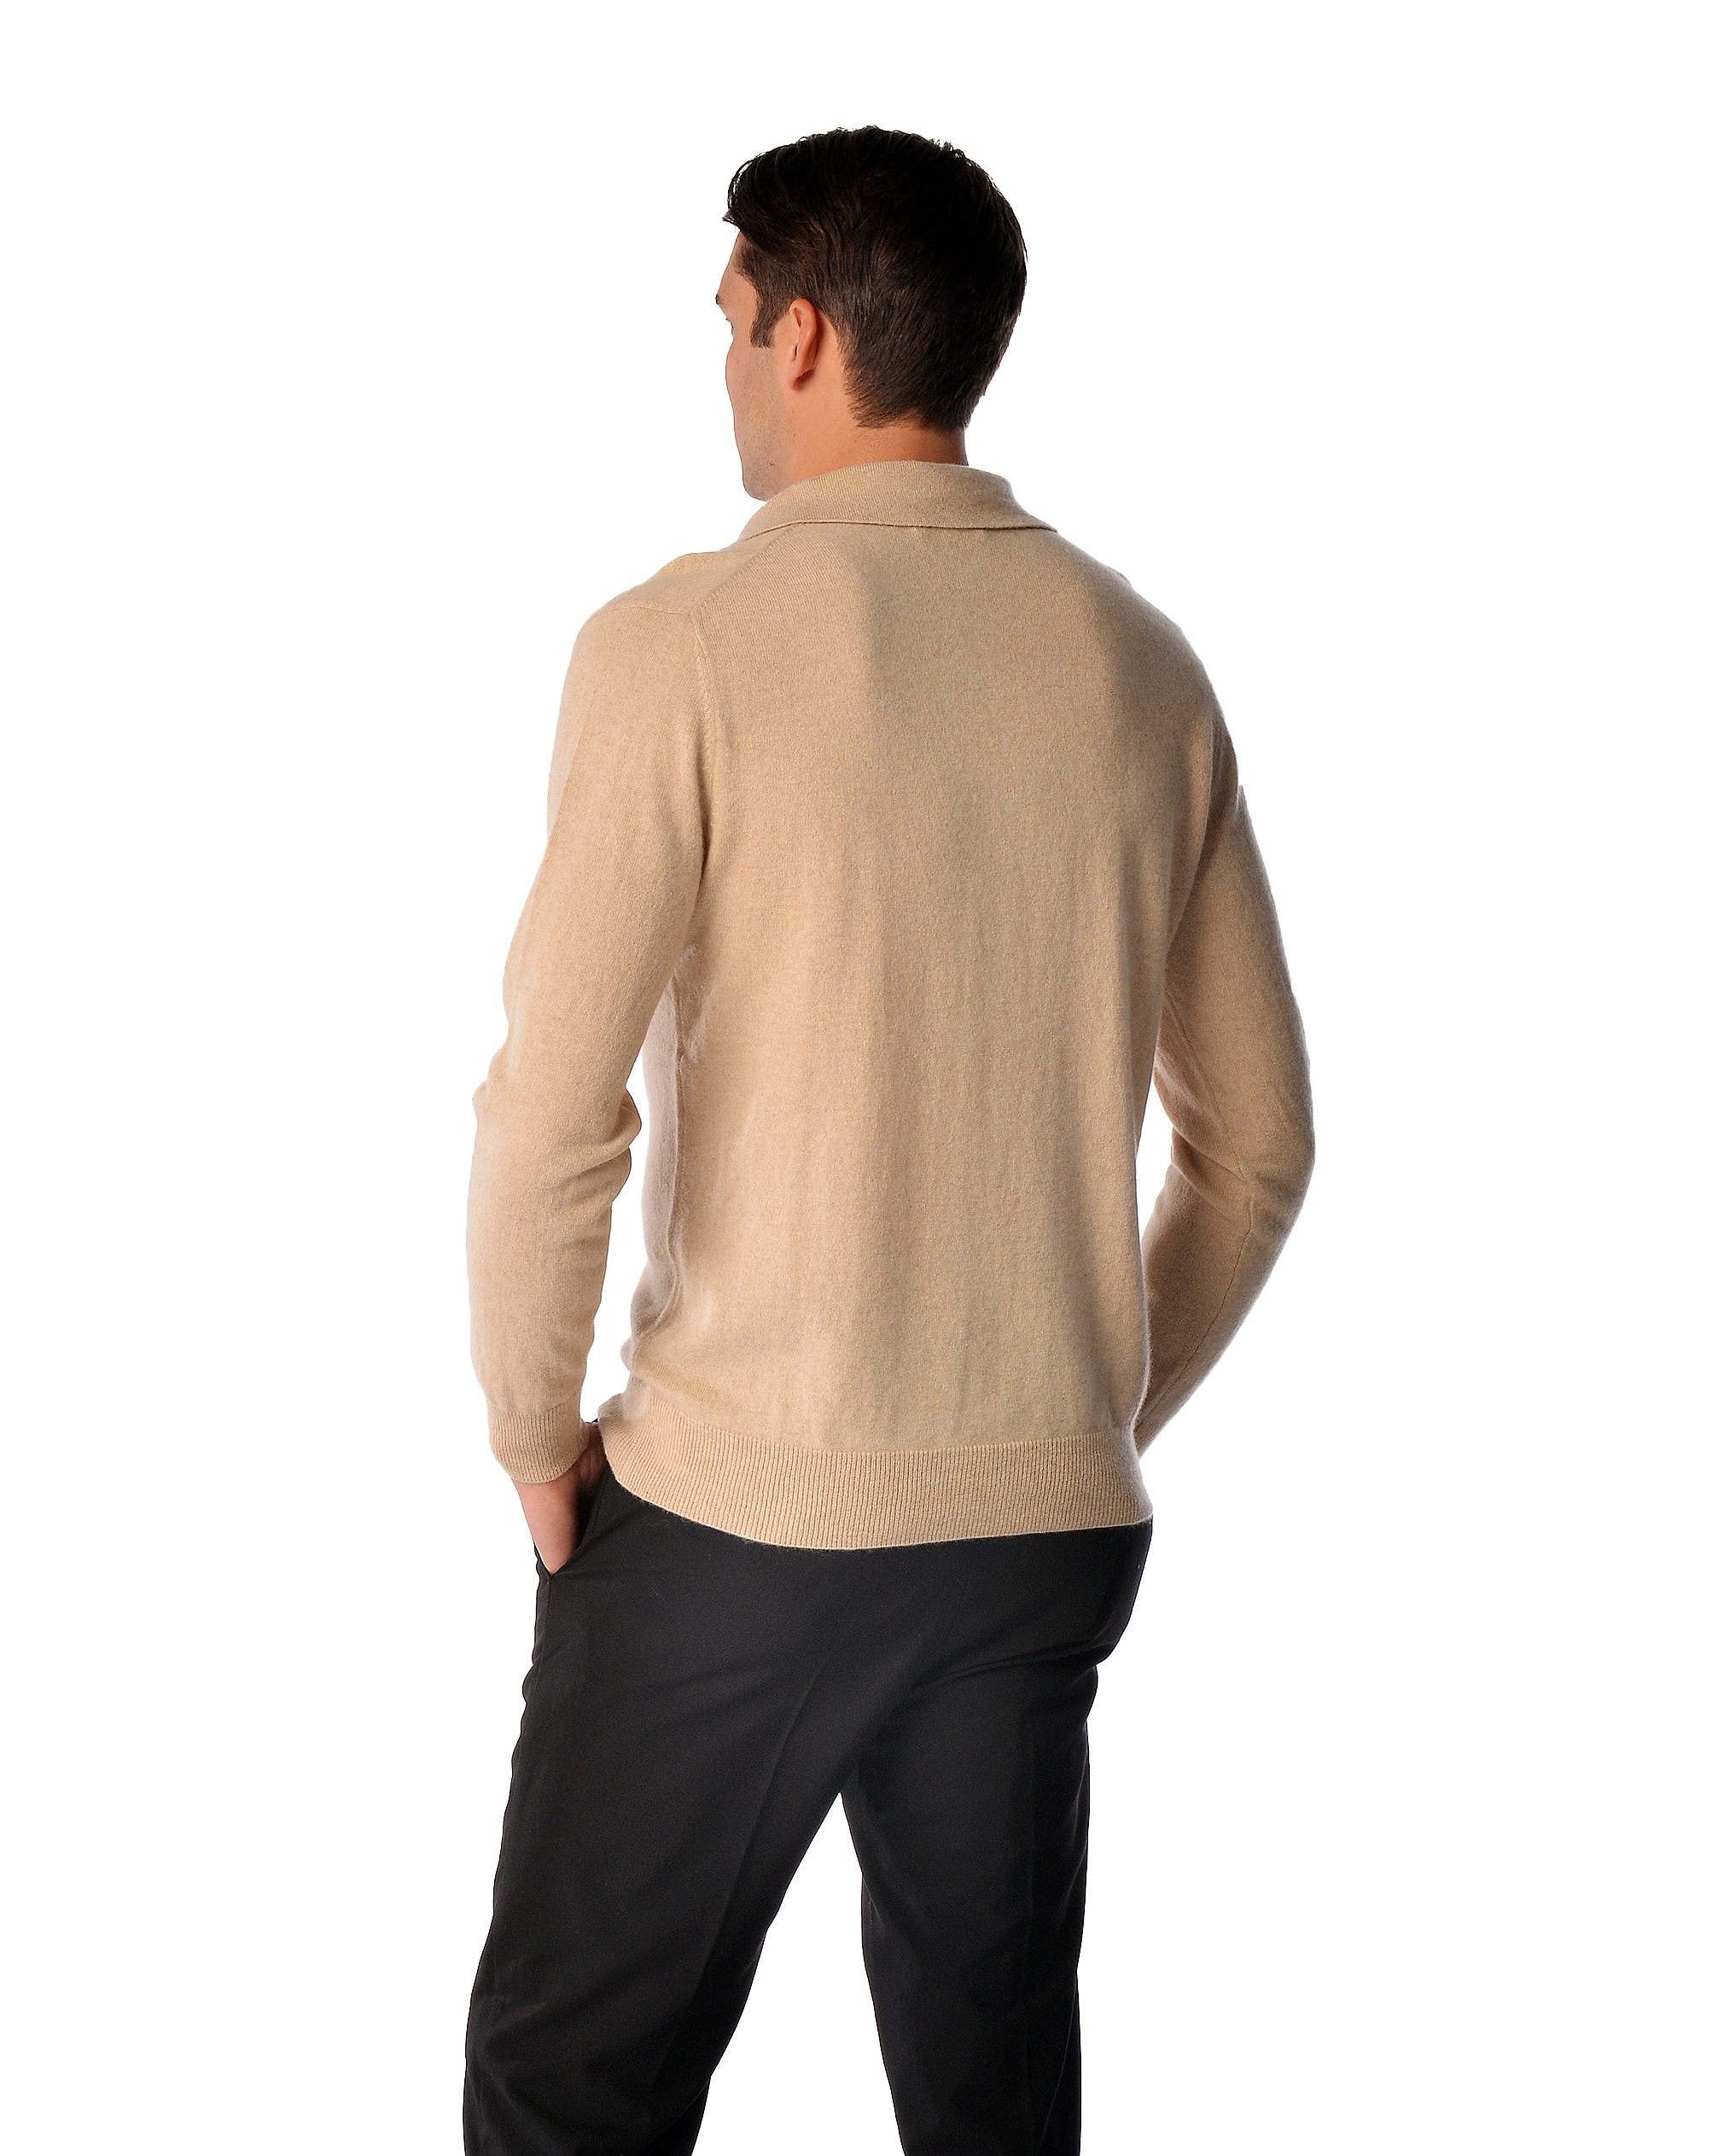 Men\'s Pure Cashmere Polo Sweater (Faded Pewter, Medium)